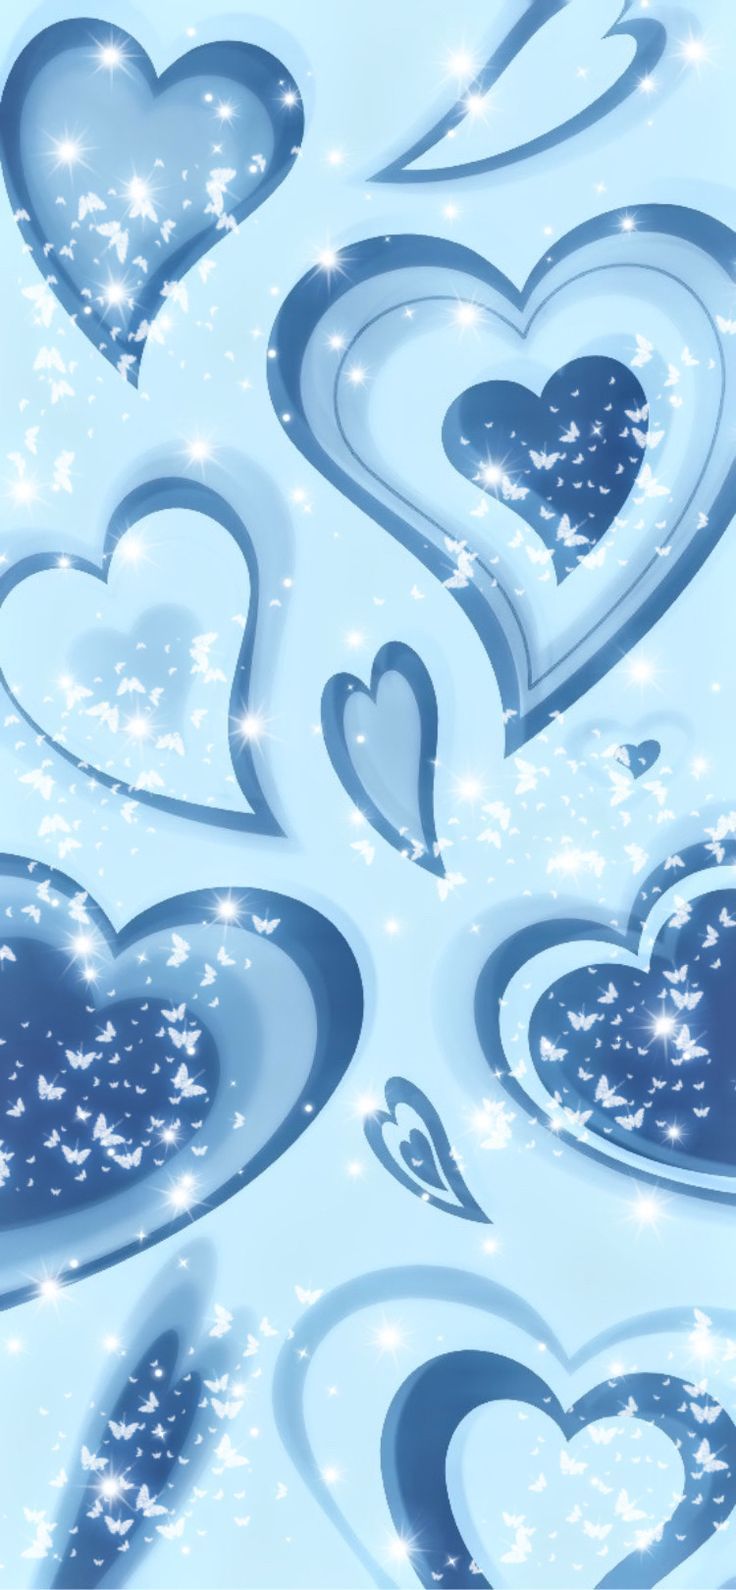 Blue heart  imikimicom  Heart wallpaper Heart pictures Love images